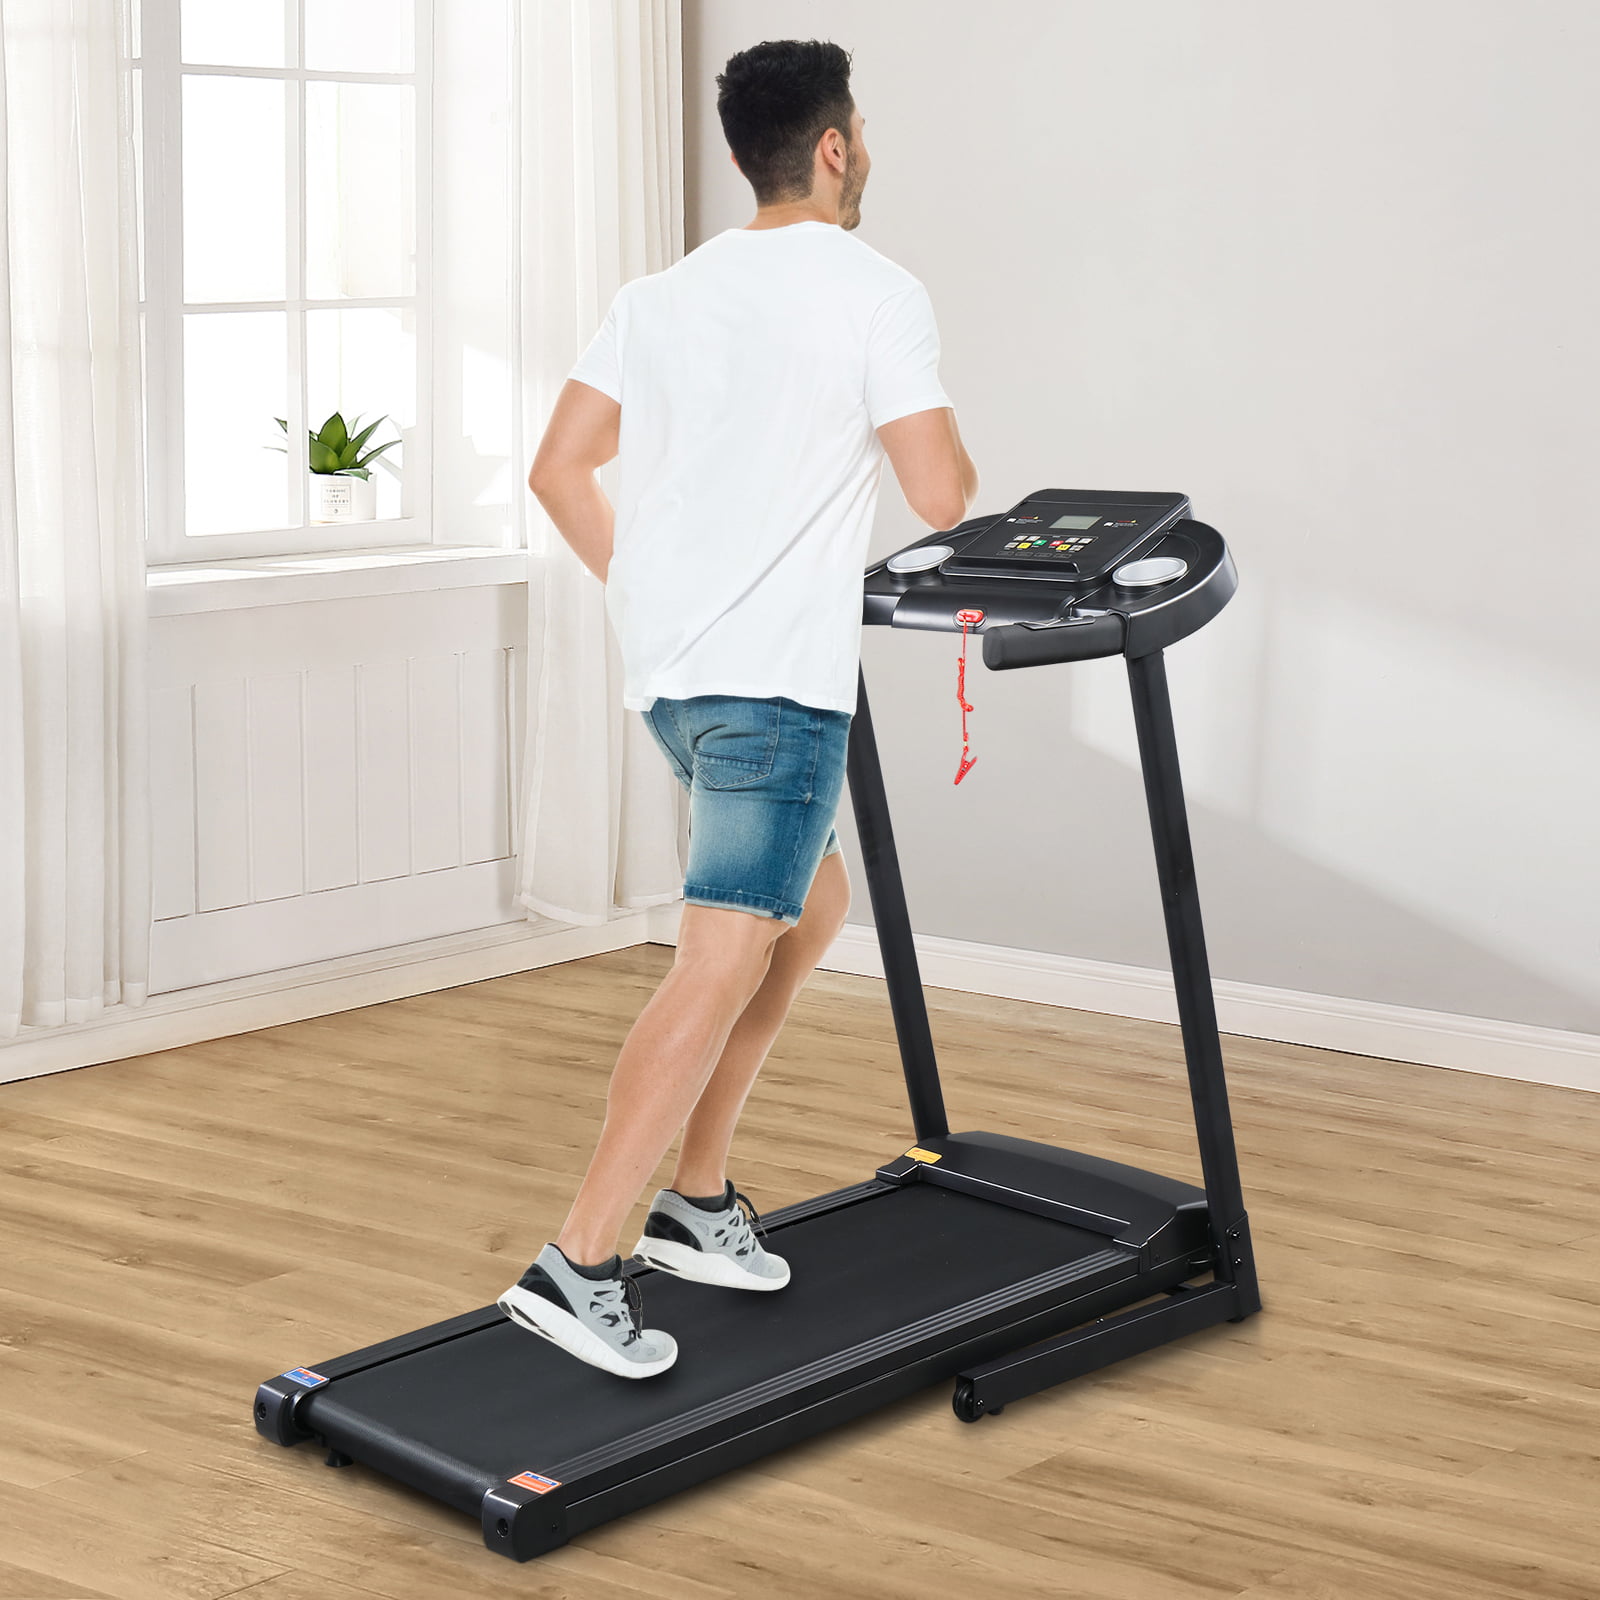 Electric Foldable Exercise Fitness Upgraded Smart Digital Foldable Treadmill 